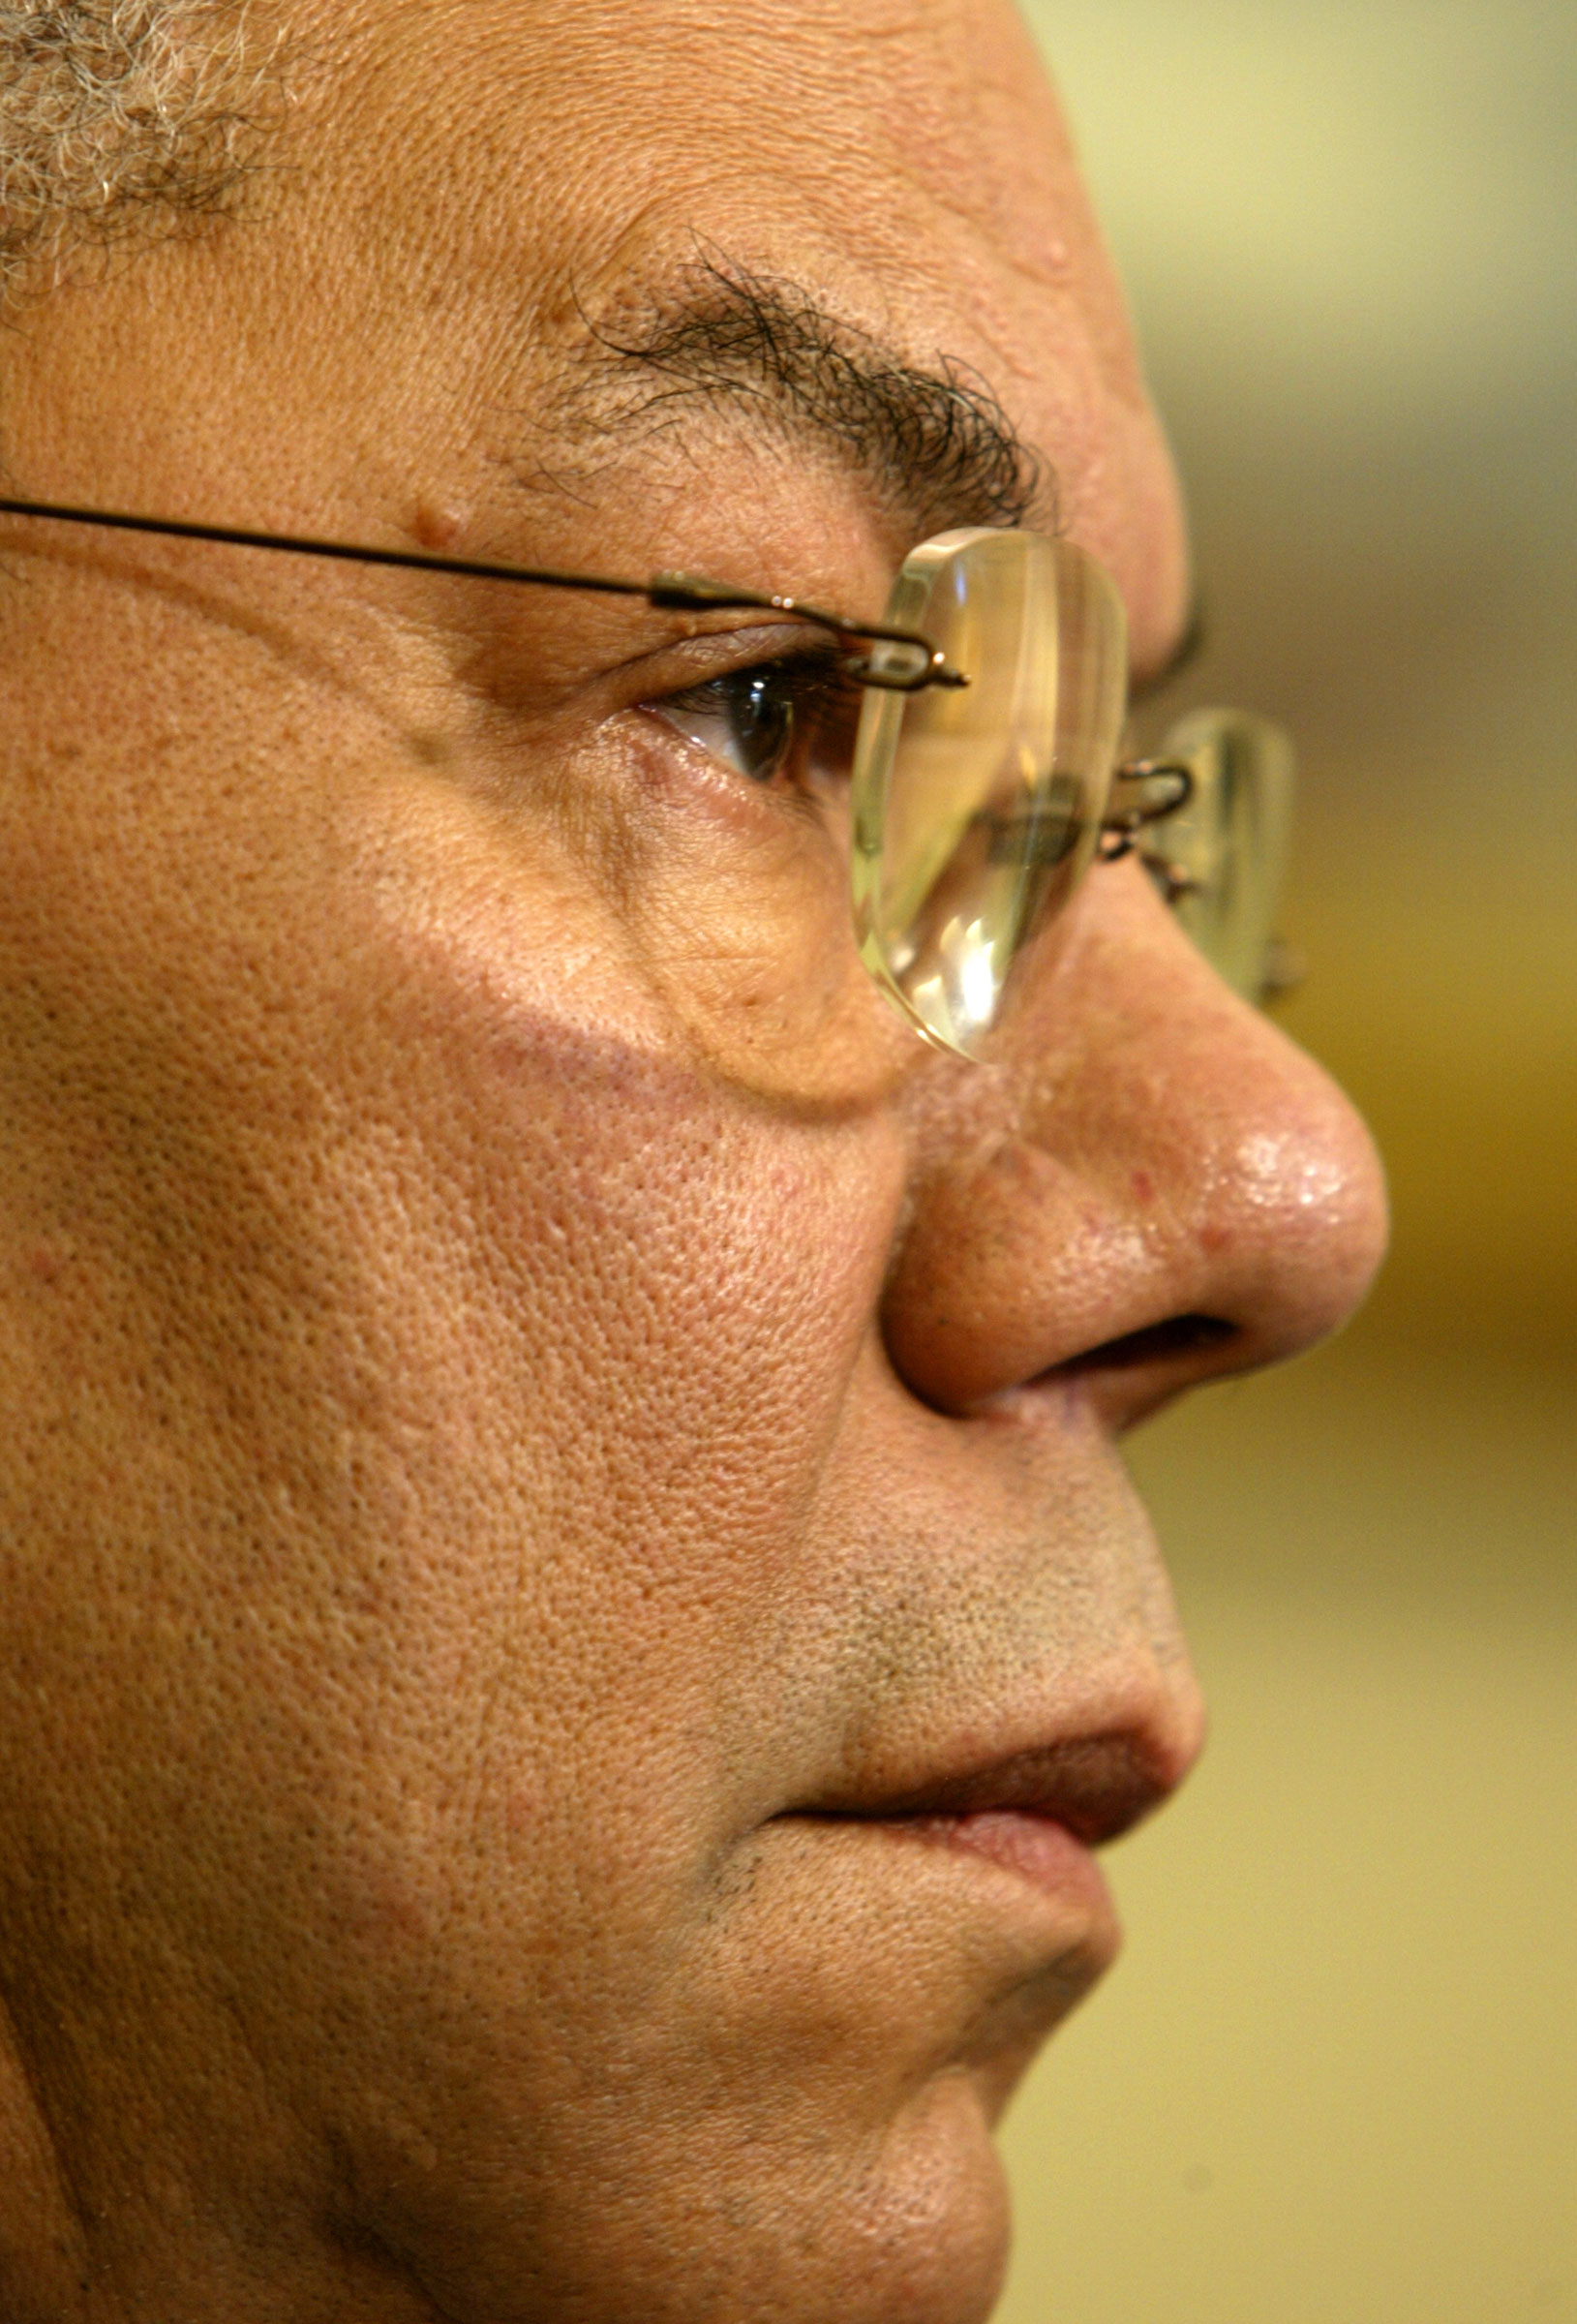 Secretary of State Colin Powell in the Oval Office 2002. (Brooks Kraft—Corbis/Getty Images)